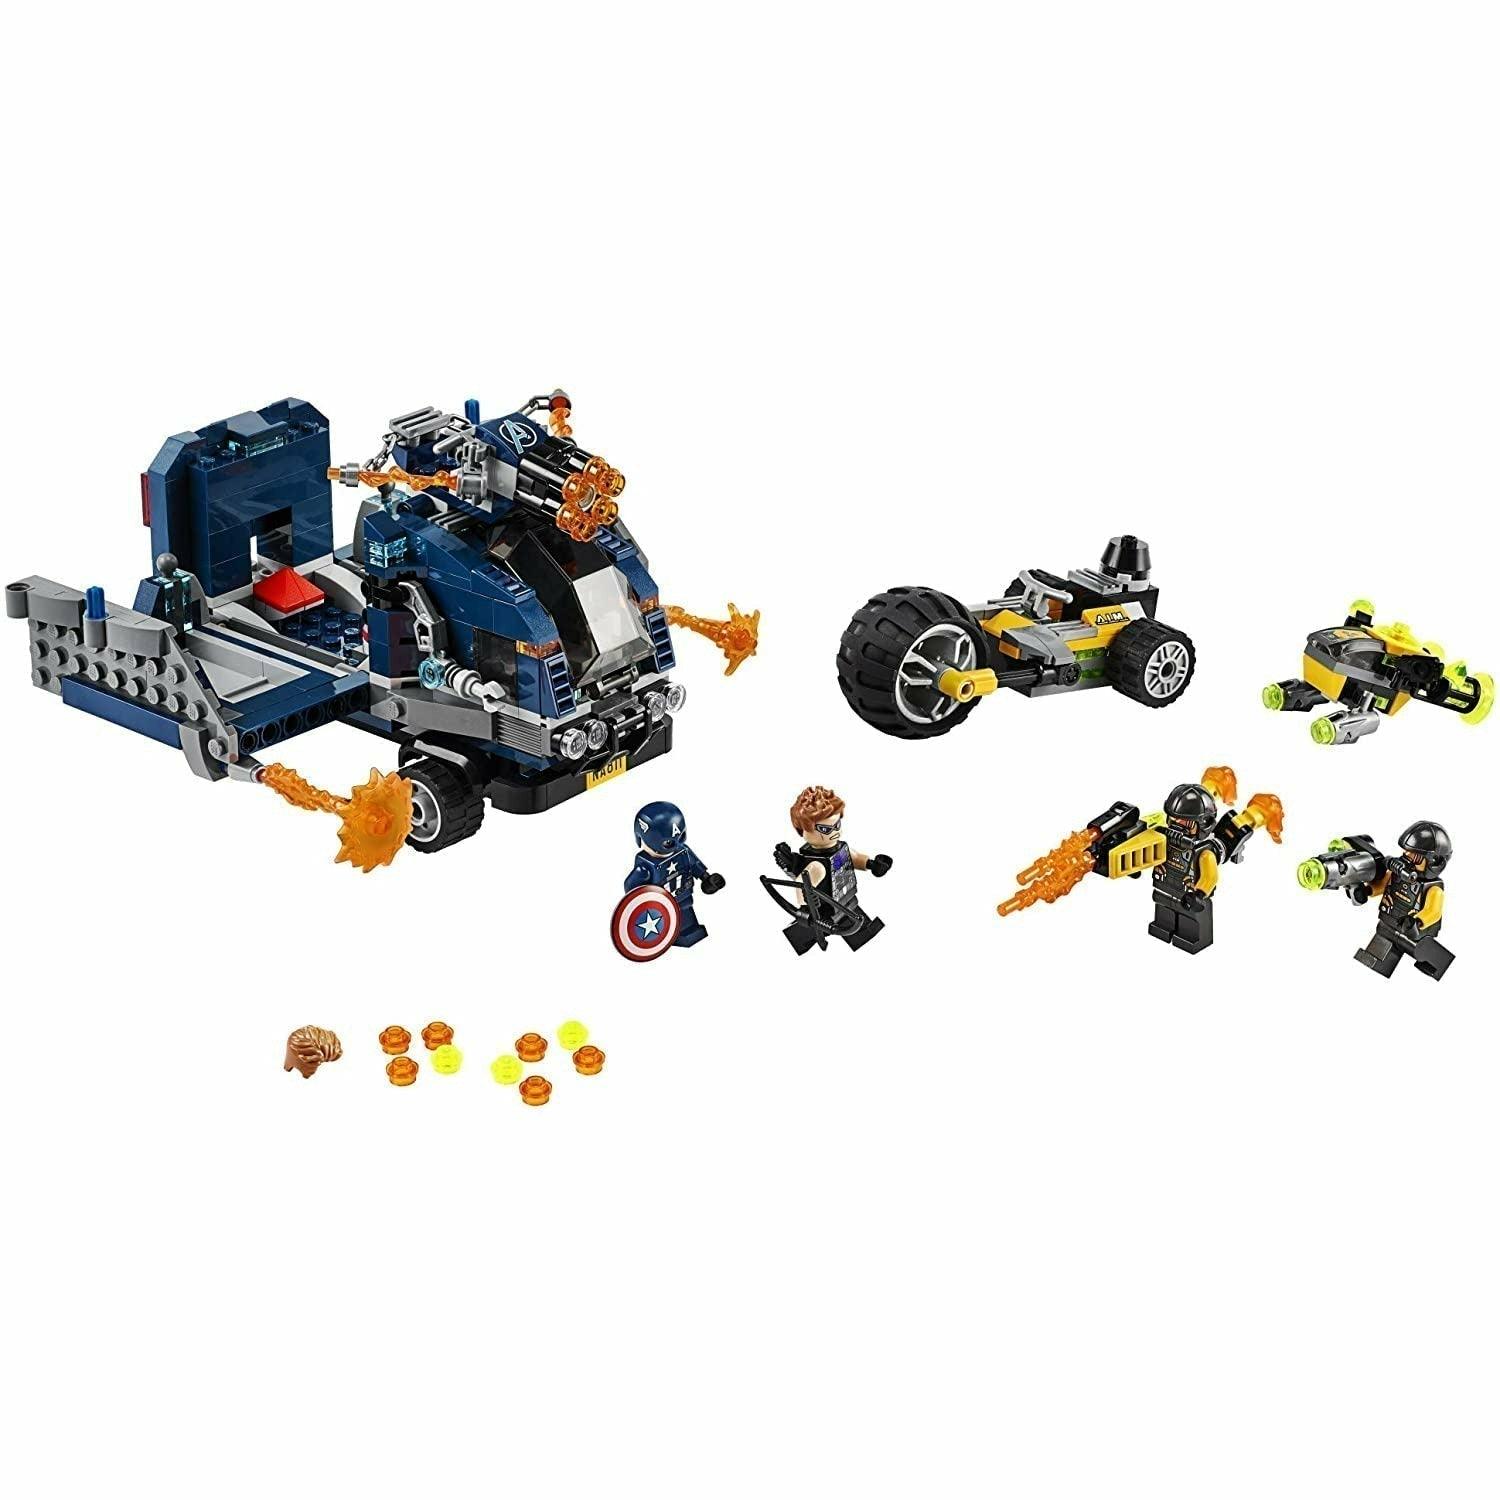 LEGO Marvel Avengers Truck Take-Down 76143 Captain America and Hawkeye Superhero Action, Cool Minifigures and Vehicles (477 Pieces) - BumbleToys - 4+ Years, 5-7 Years, Action Figures, Avengers, Boys, Captain America, Figures, LEGO, Marvel, OXE, Pre-Order